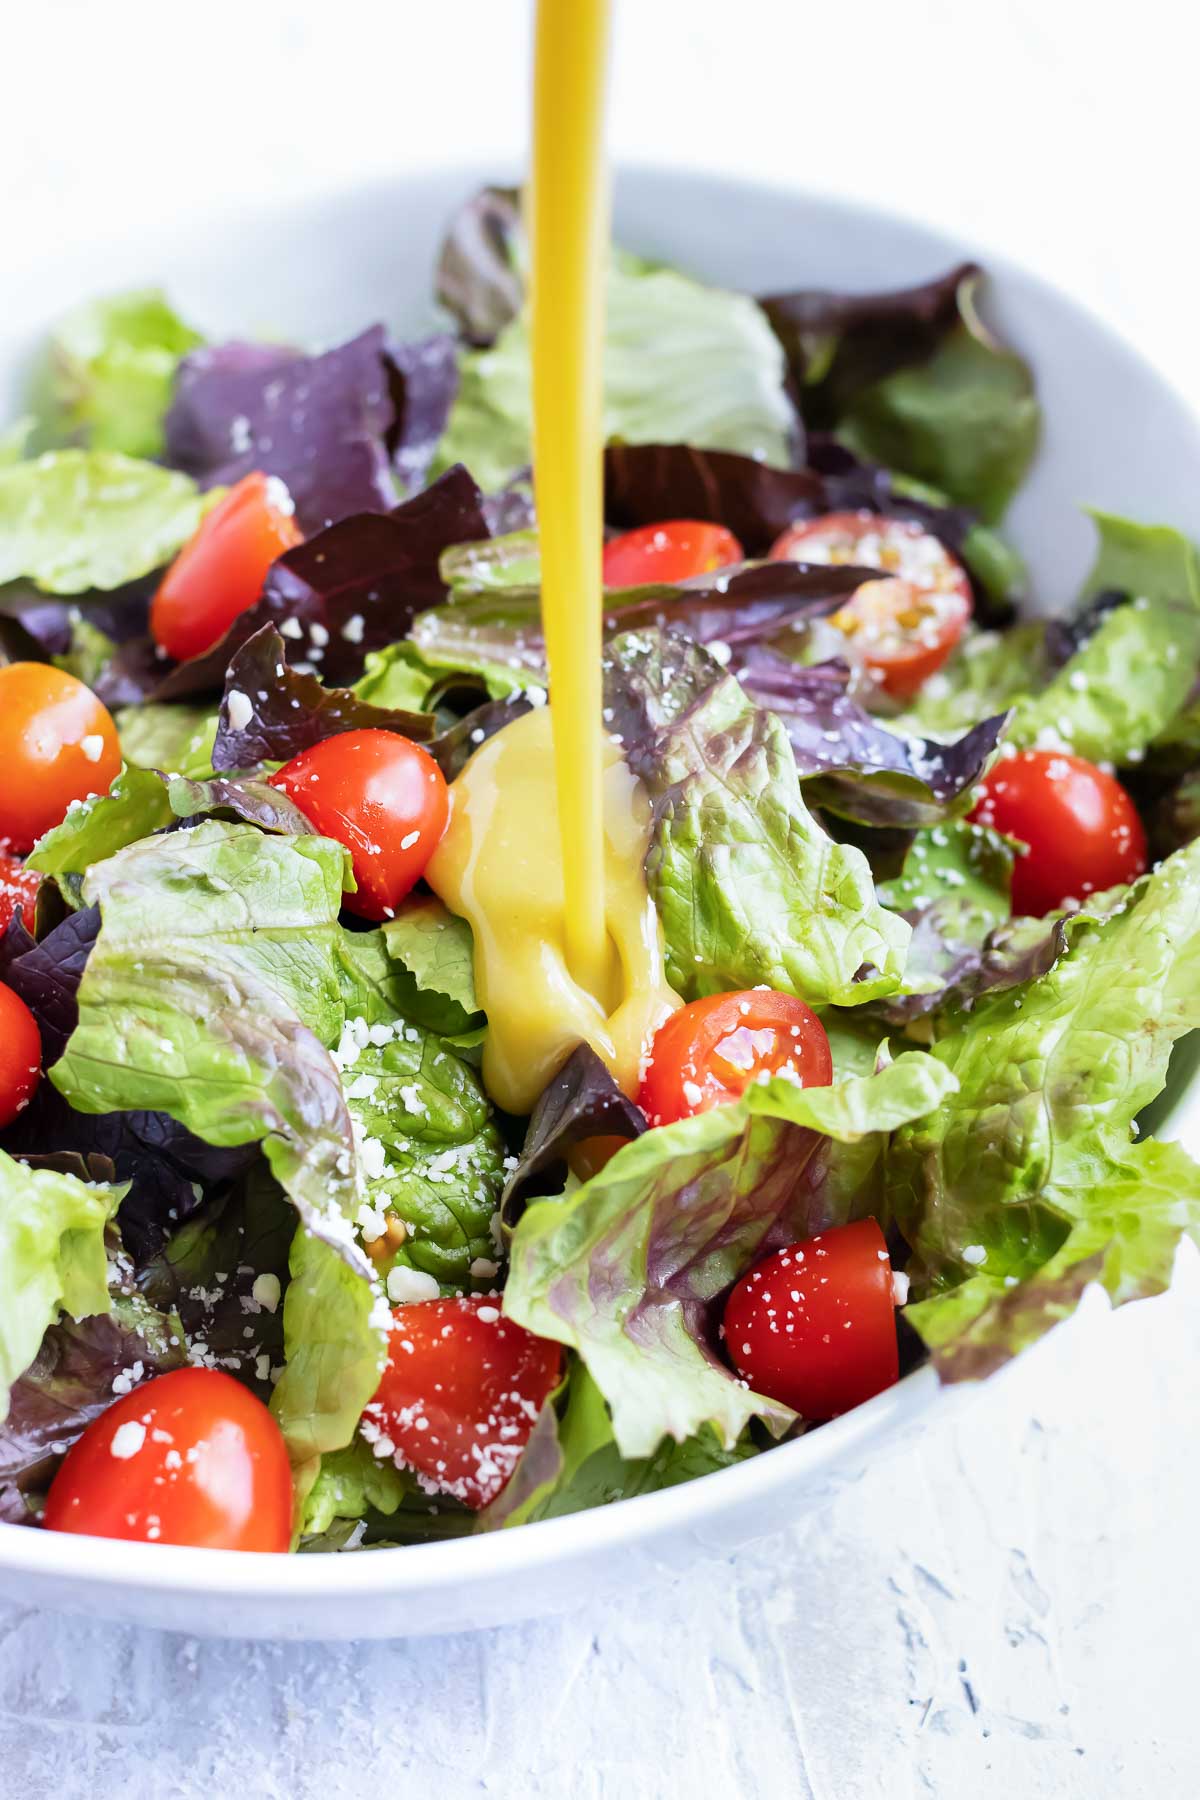 Honey mustard dressing being poured onto a salad with mixed greens and tomatoes.